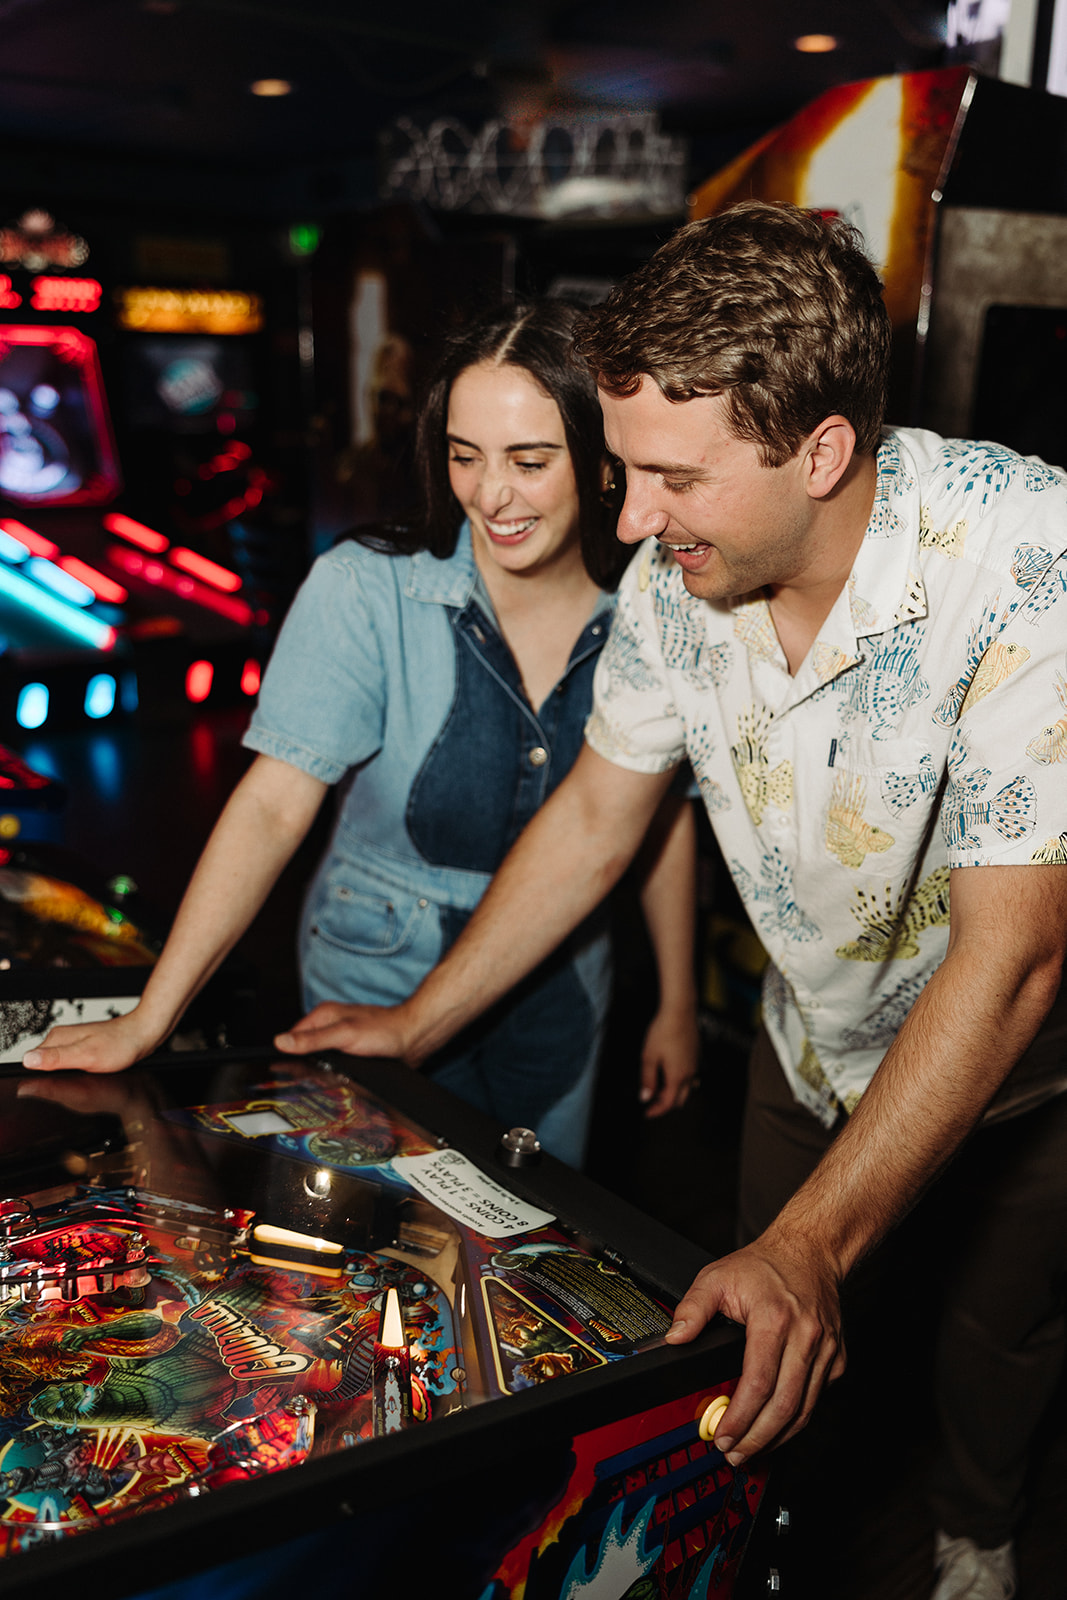 Woman watches her fiance play pinball while laughing